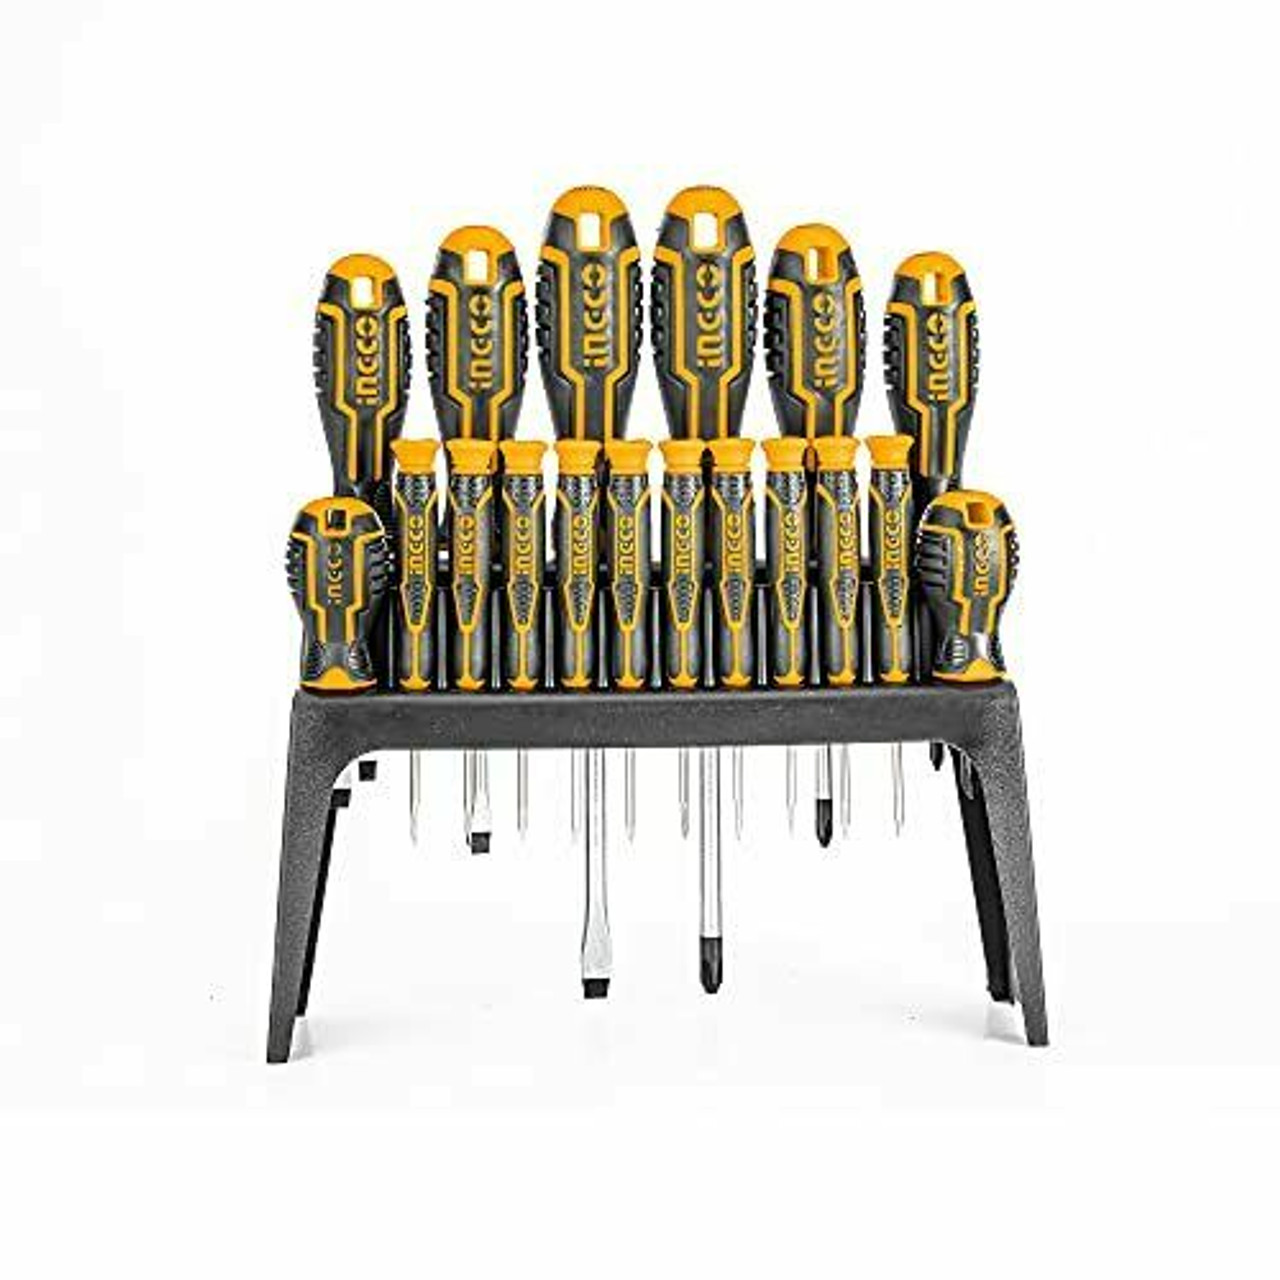 Buy online INGCO Tools Kit 18 PCS Screwdriver and Precision Screwdriver Set  (HKSD1828) from GZ Industrial Supplies Nigeria